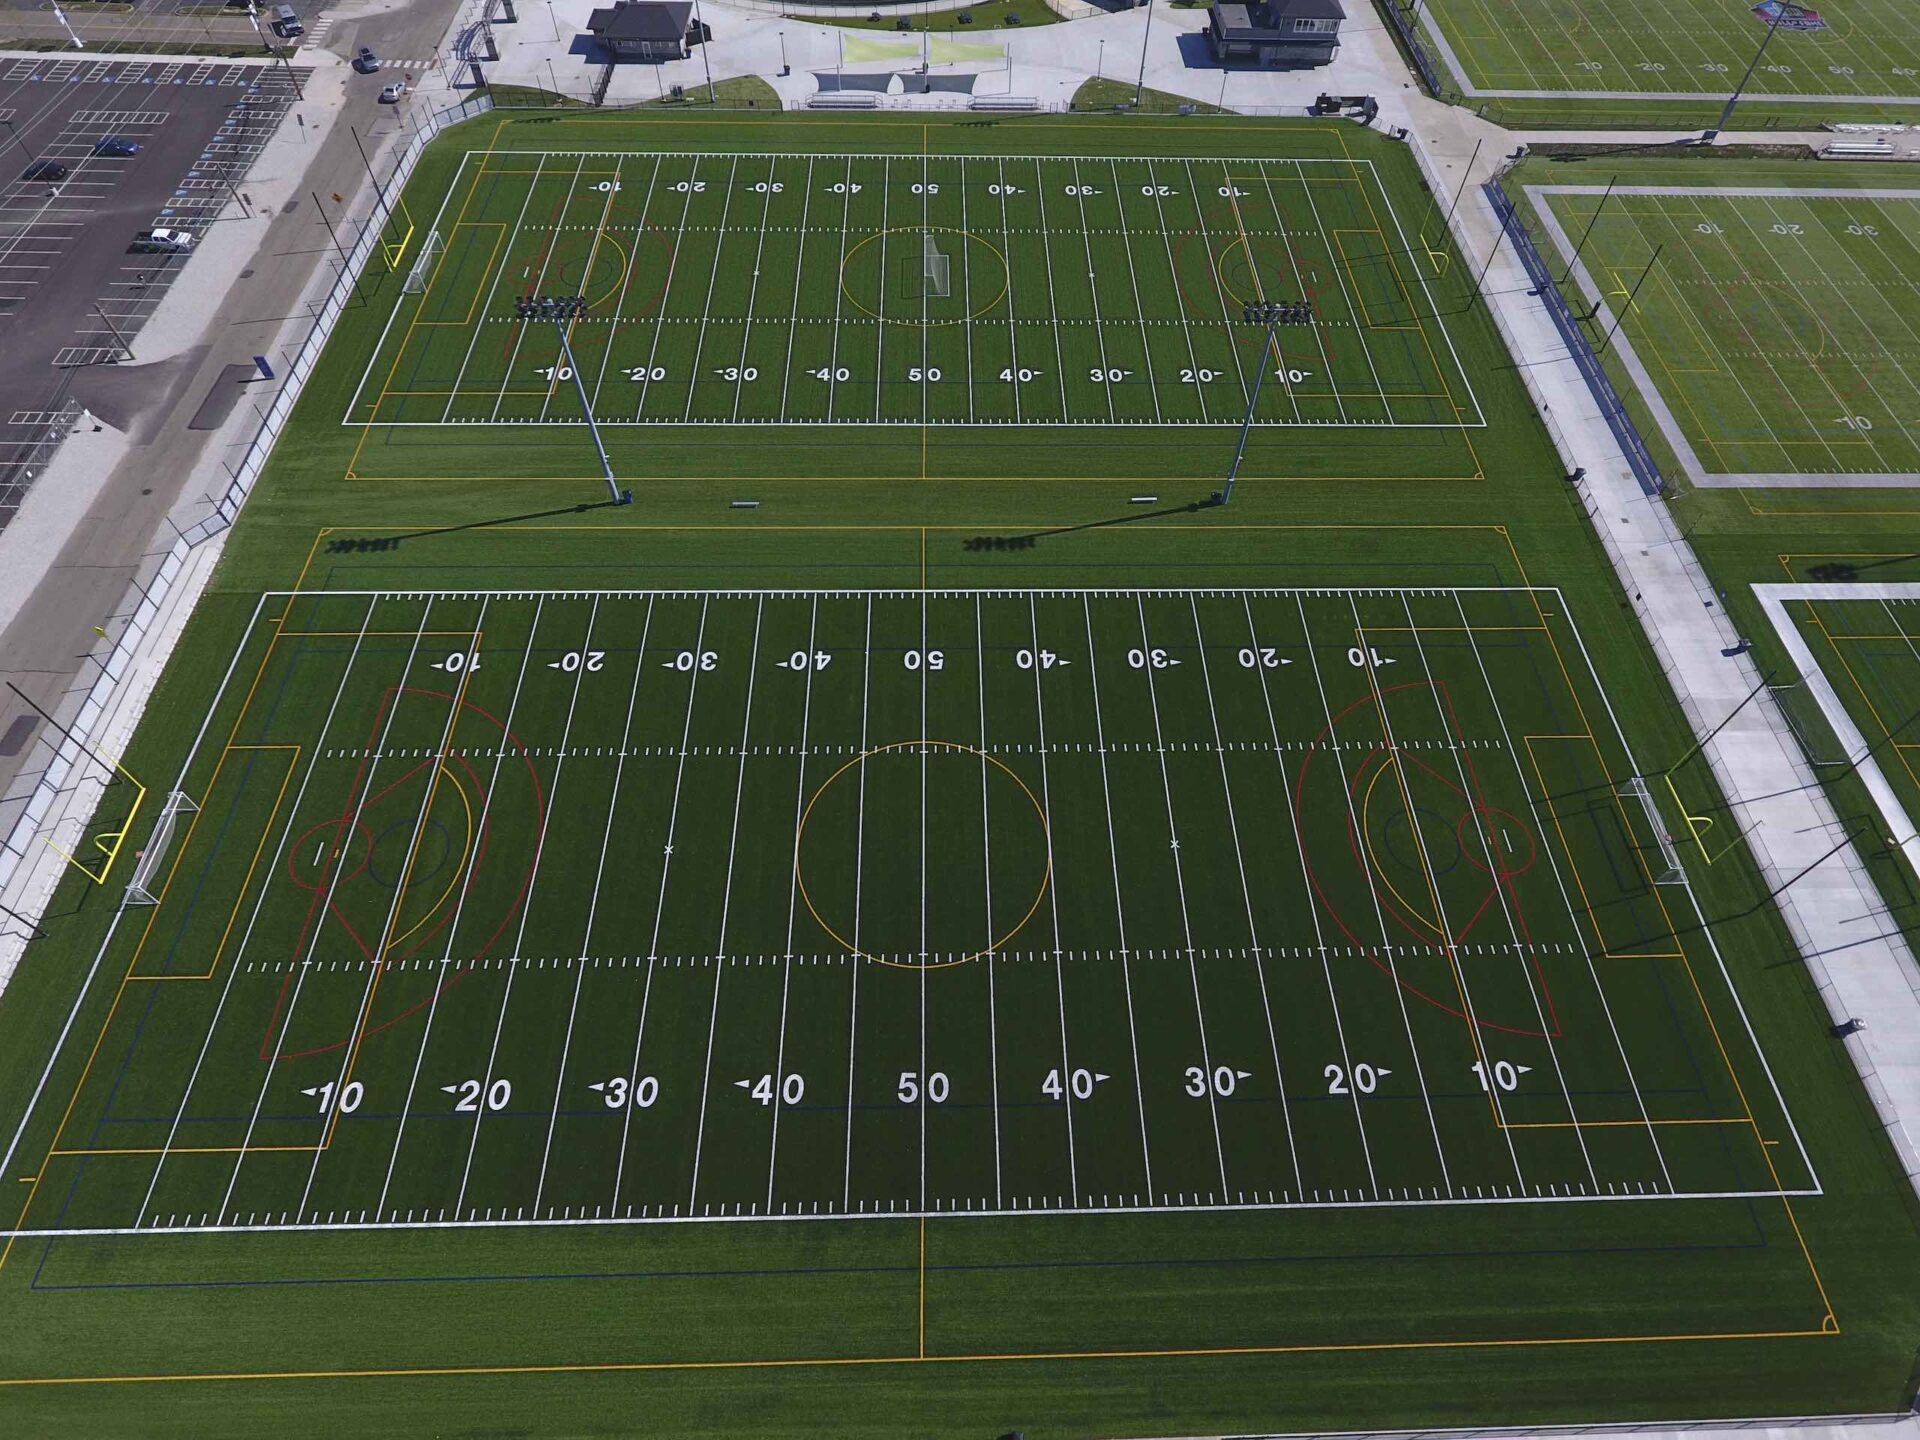 An aerial view of multiple sports fields with various line markings for football and soccer, surrounded by parking spaces and empty roads.